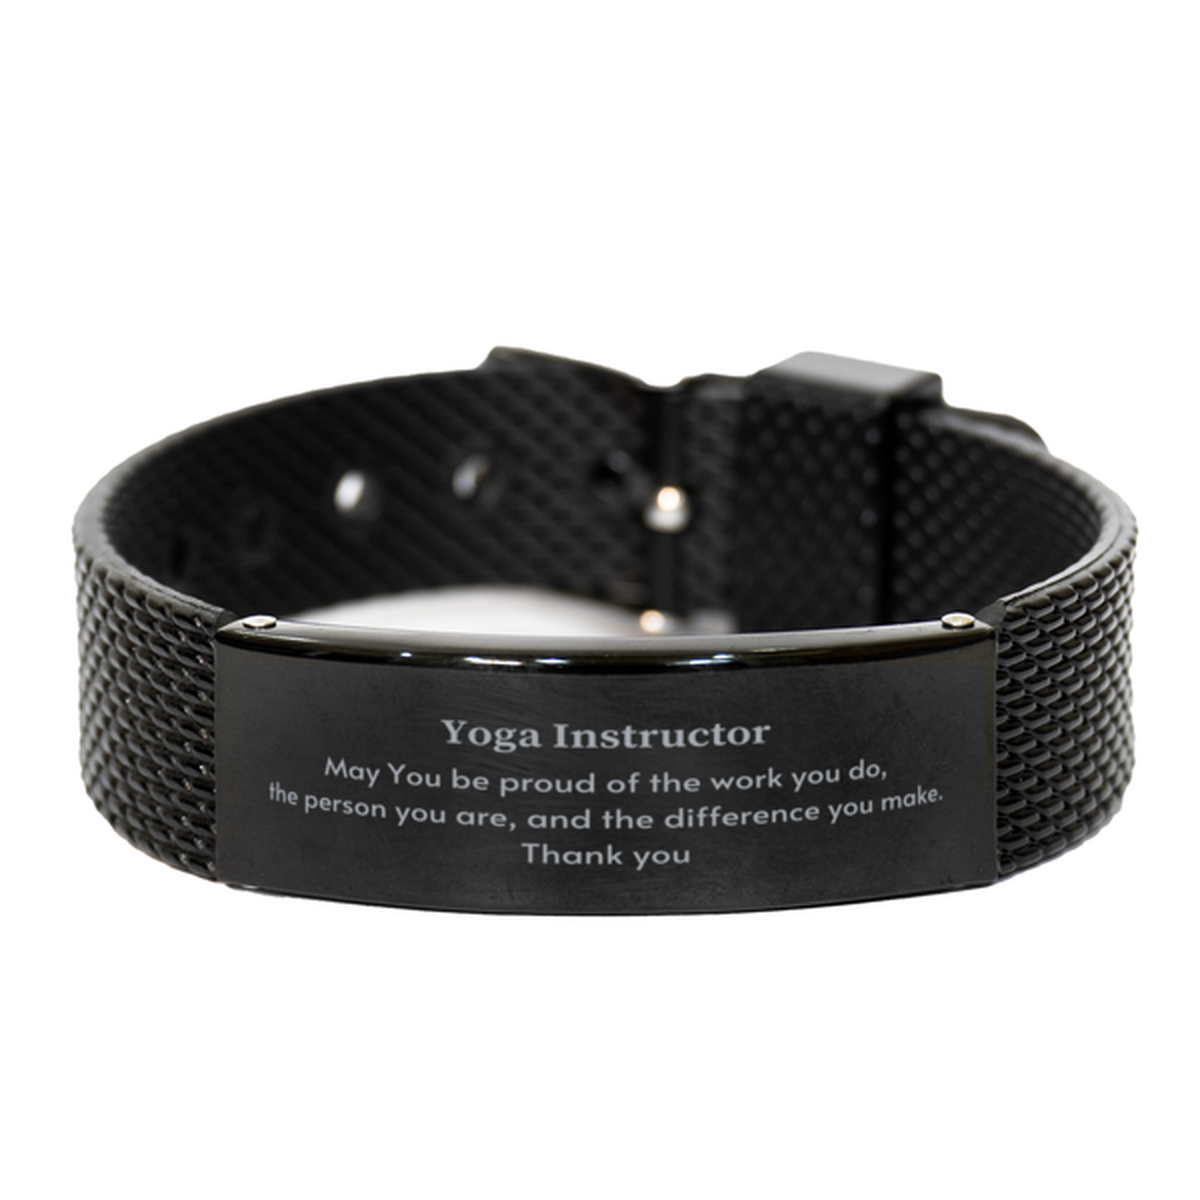 Heartwarming Black Shark Mesh Bracelet Retirement Coworkers Gifts for Yoga Instructor, Yoga Instructor May You be proud of the work you do, the person you are Gifts for Boss Men Women Friends